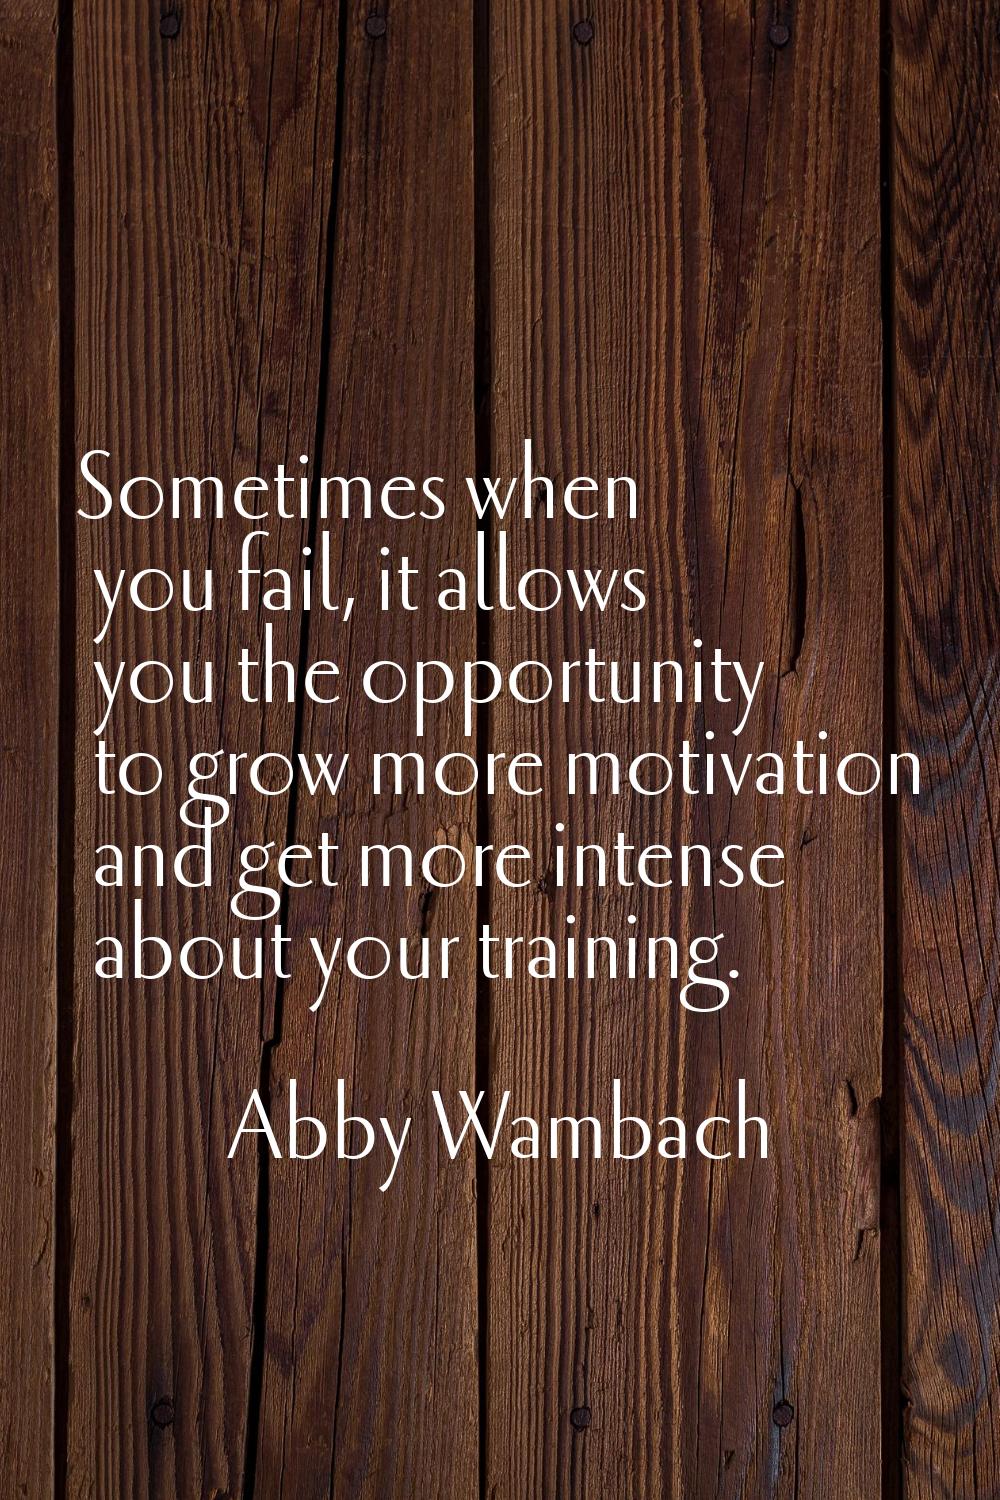 Sometimes when you fail, it allows you the opportunity to grow more motivation and get more intense